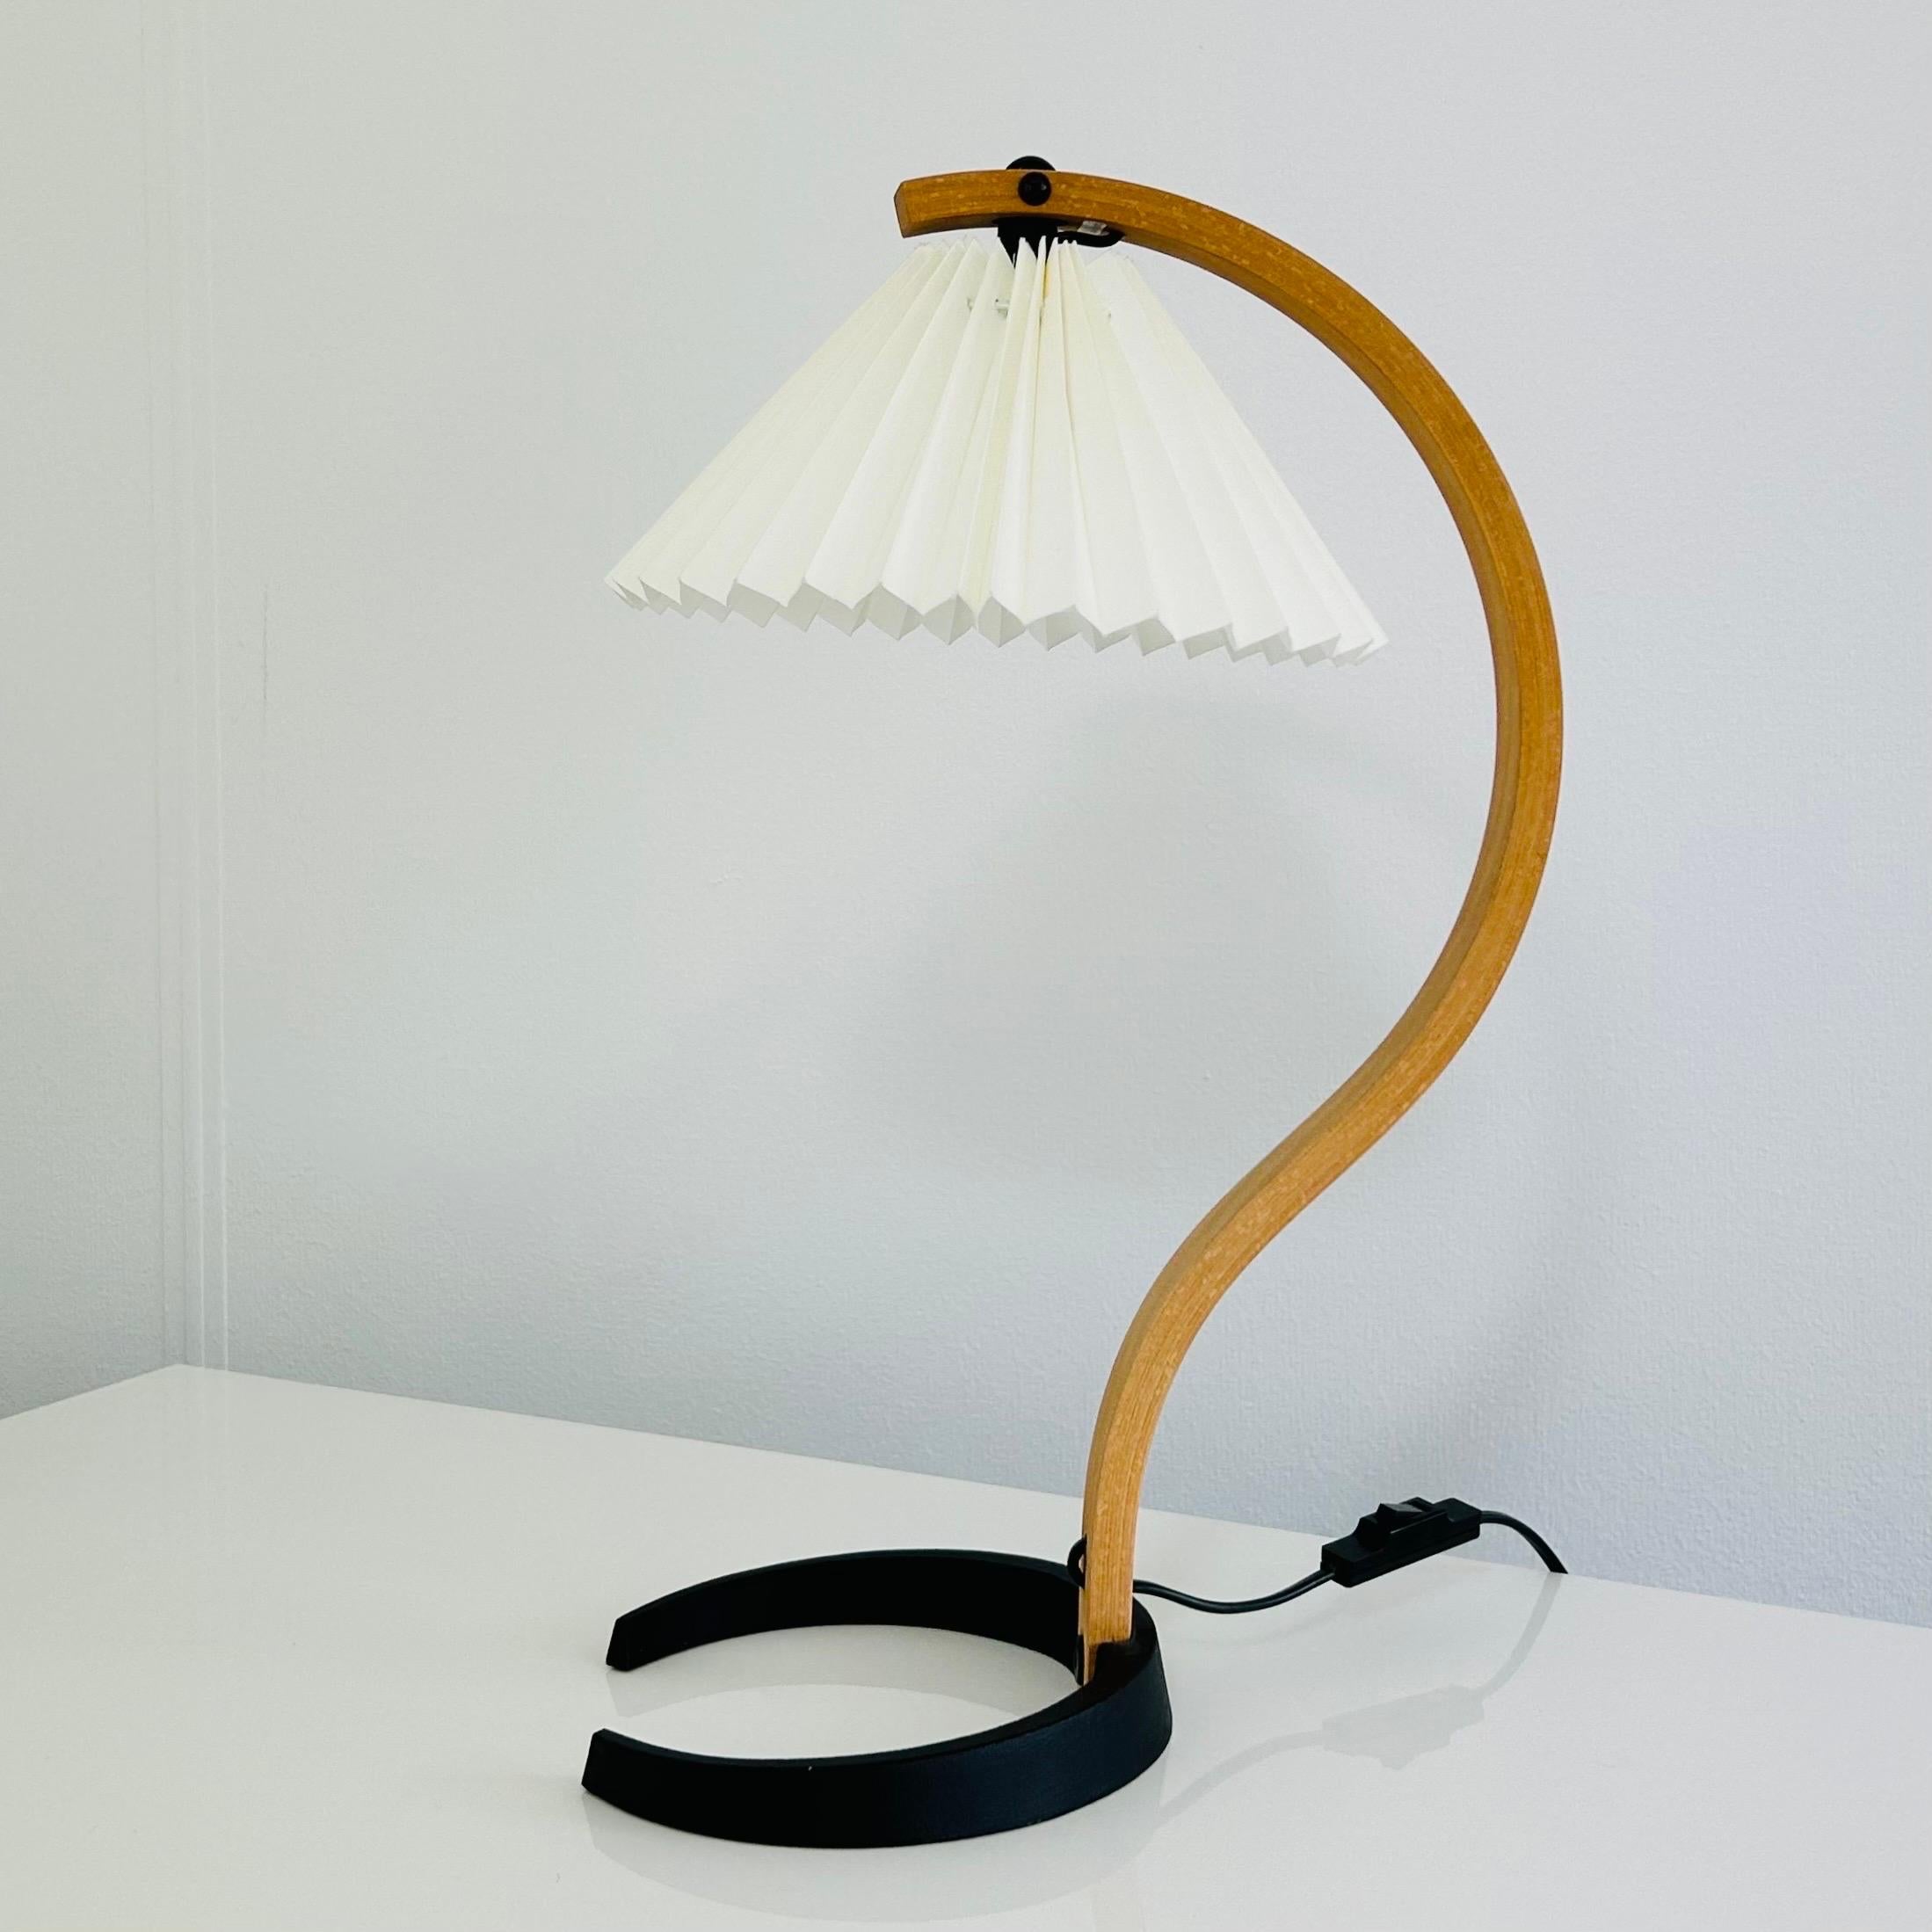 An original Danish desk lamp by Mads Caprani. It is the desk version of the famous Caprani no. 840 Timbeline floor lamp. A stunning piece effortlessly capturing the timeless of modern Scandinavian design. 

* A bend beech veneer table lamp with a